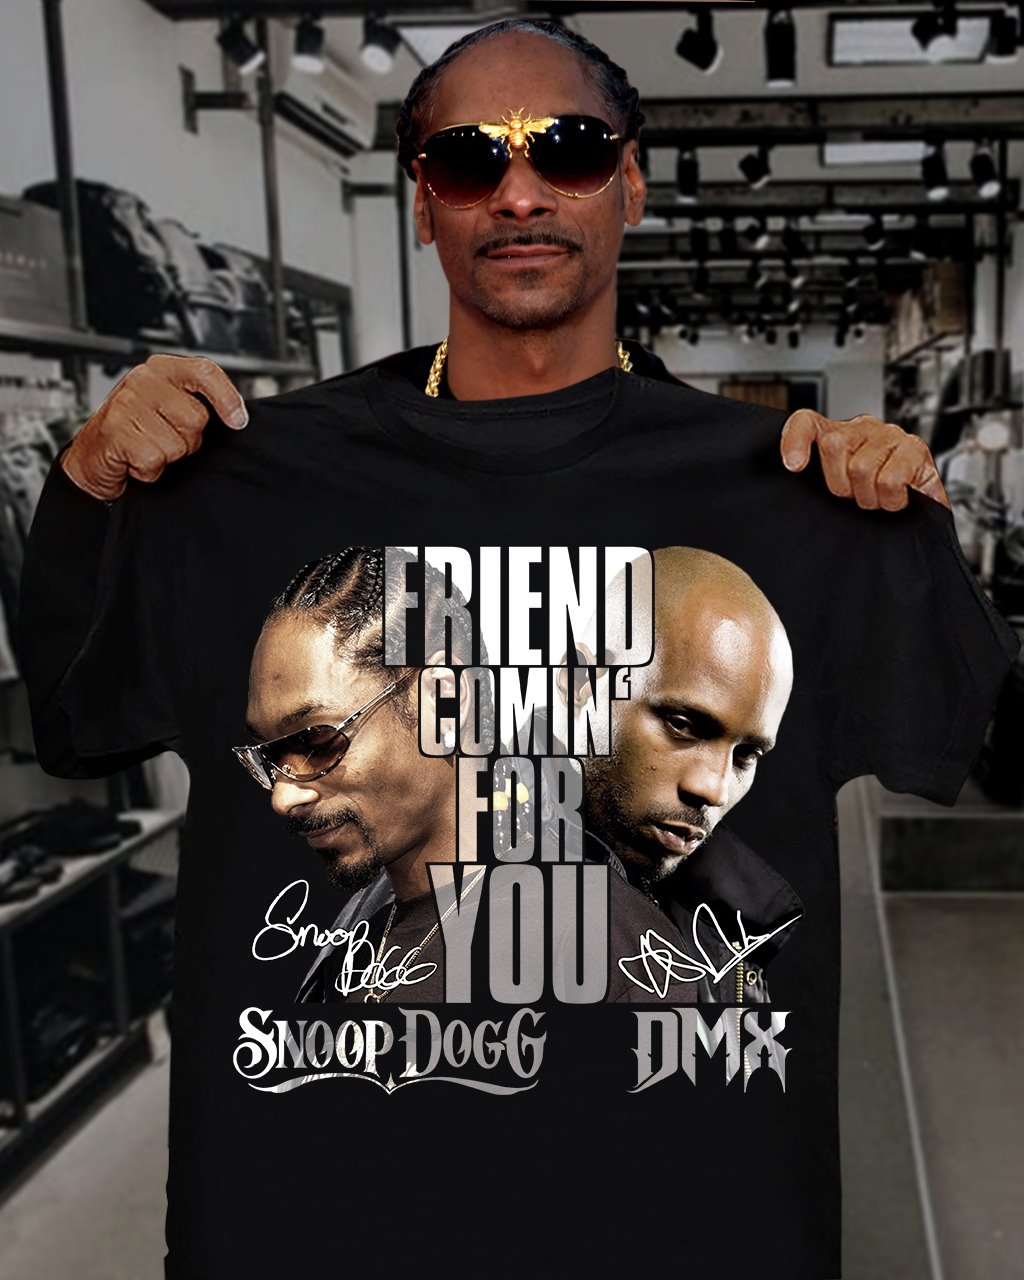 Friend comin for you - SnoopDogg and DMX